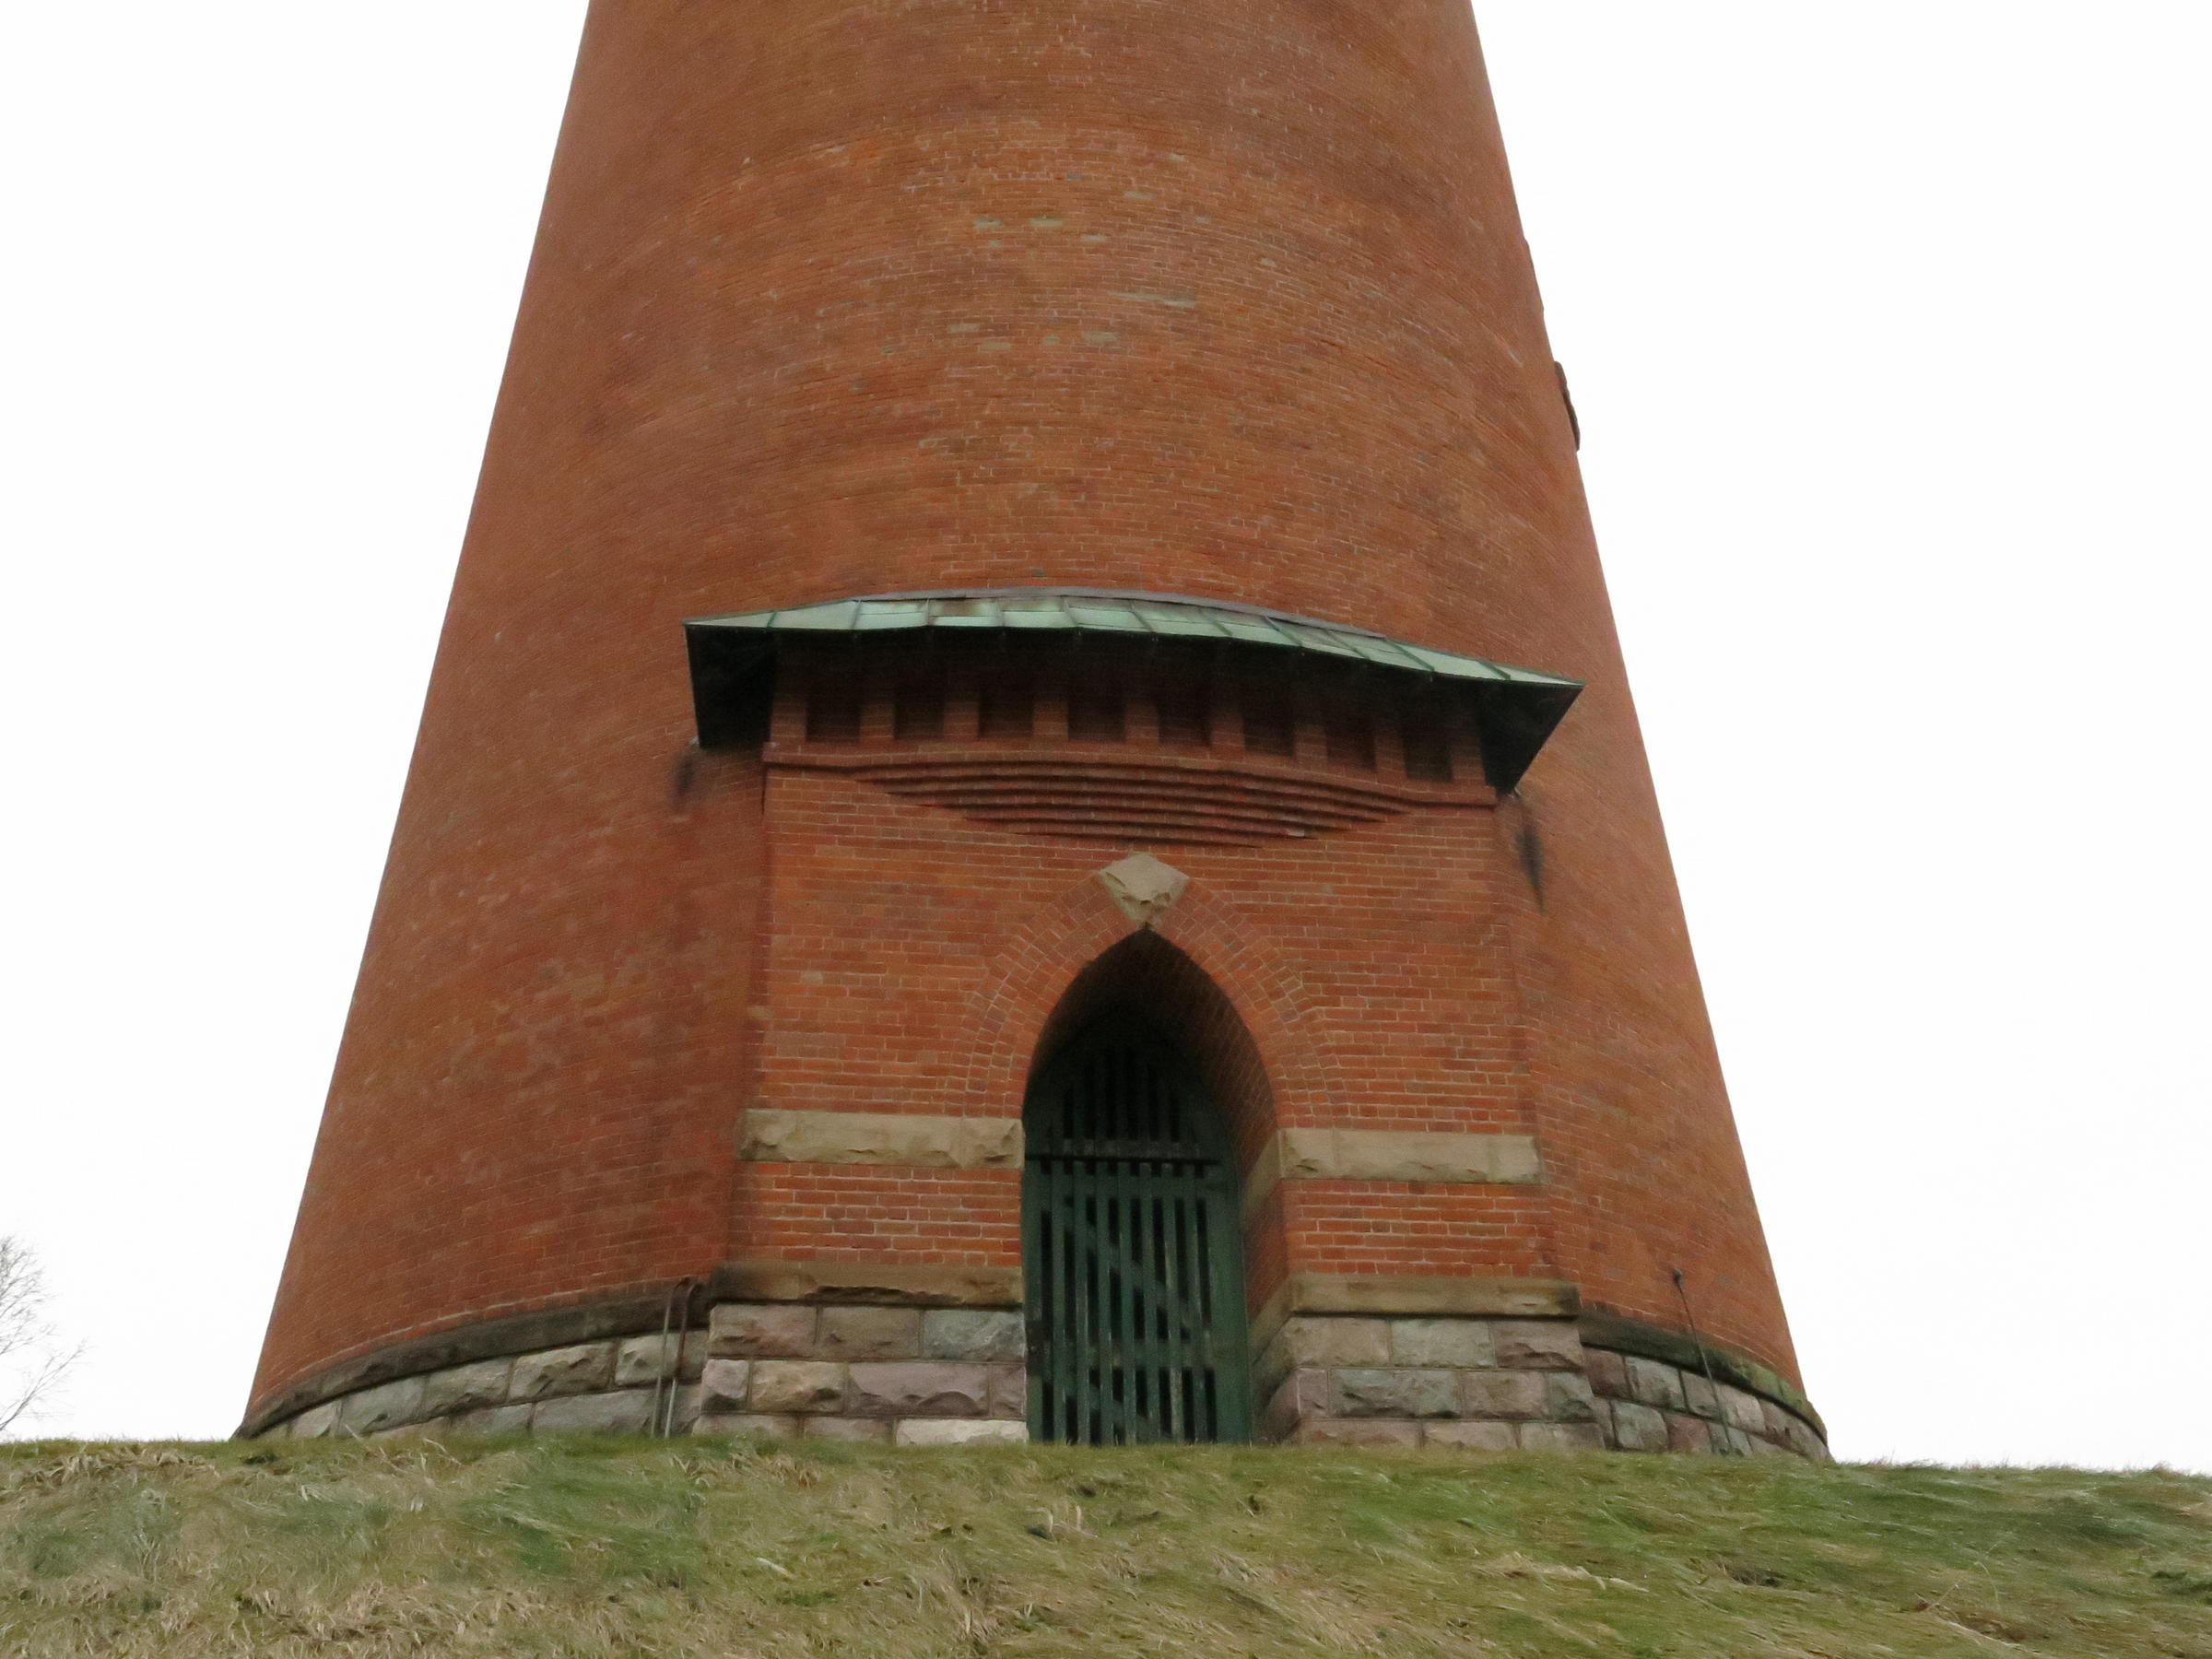 A Fear-of-Heights Test in an Old Water Tower | WMUK